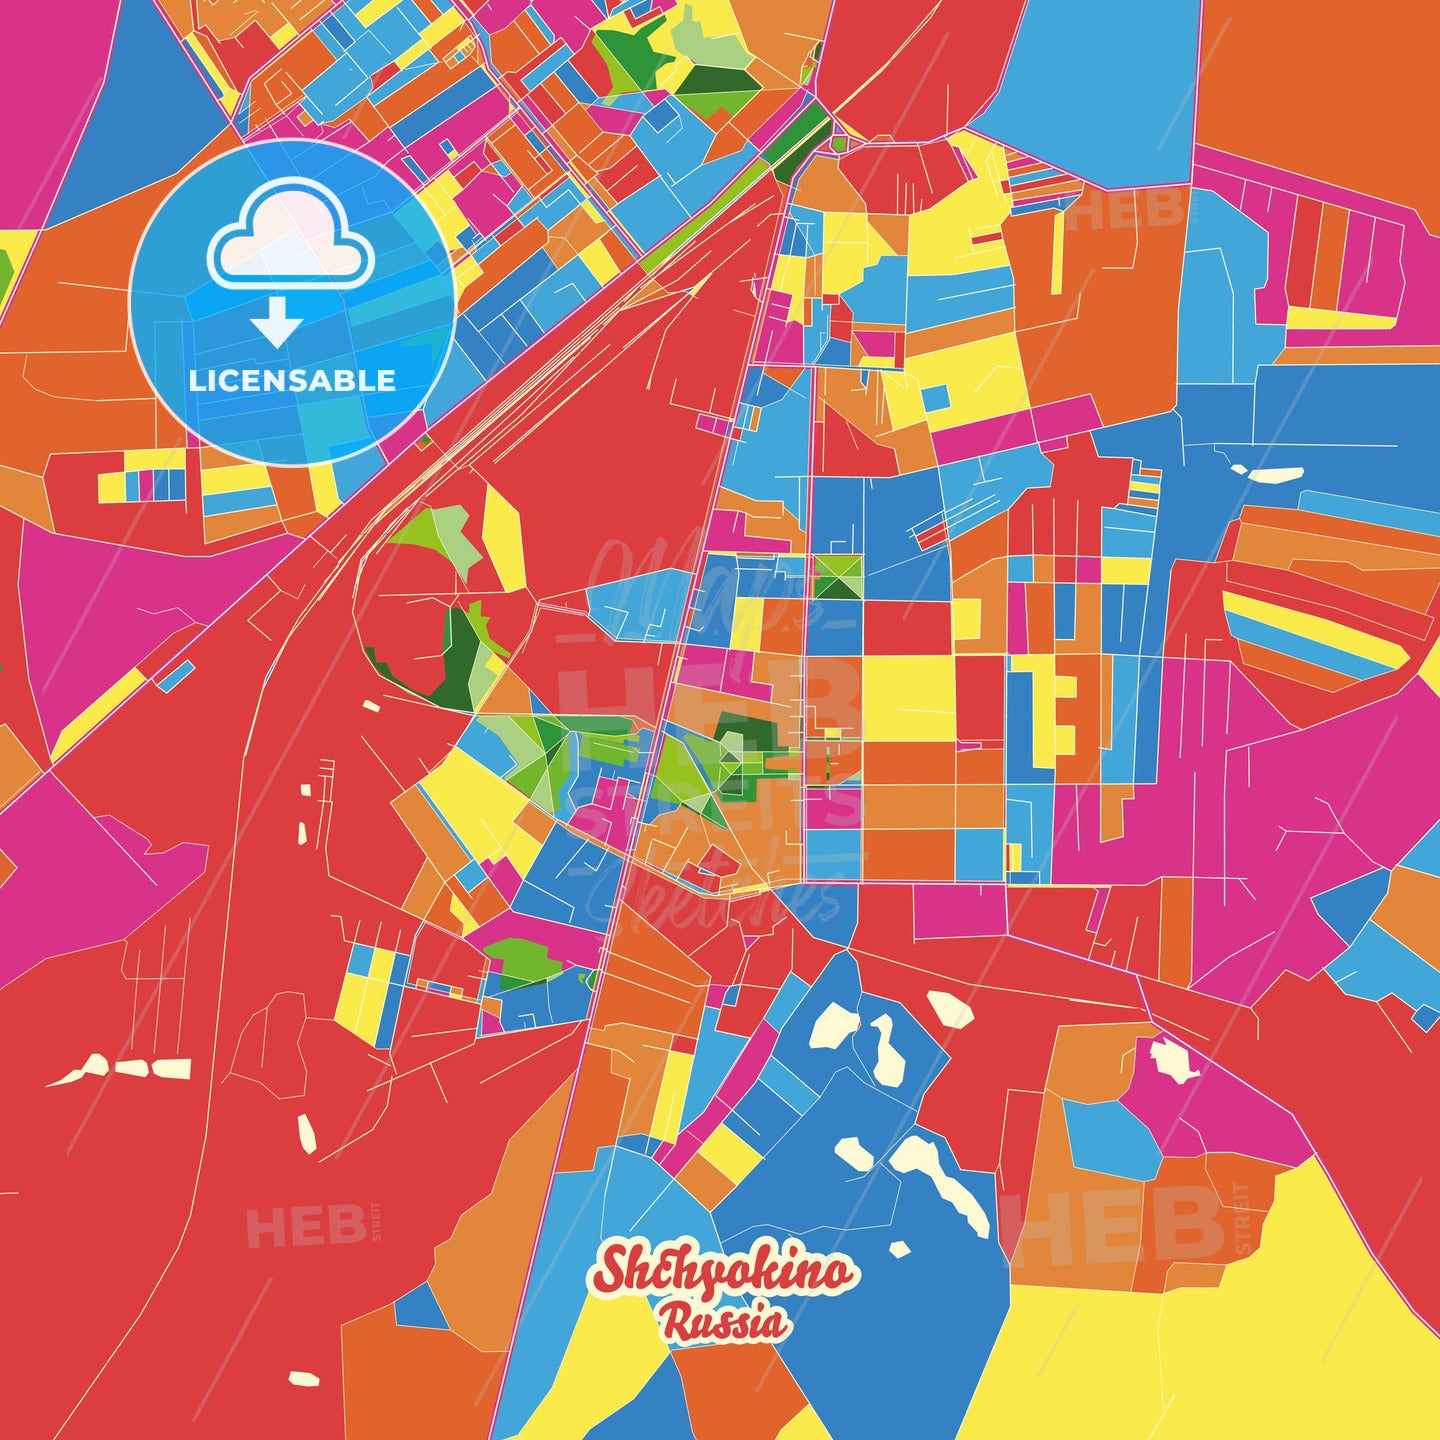 Shchyokino, Russia Crazy Colorful Street Map Poster Template - HEBSTREITS Sketches